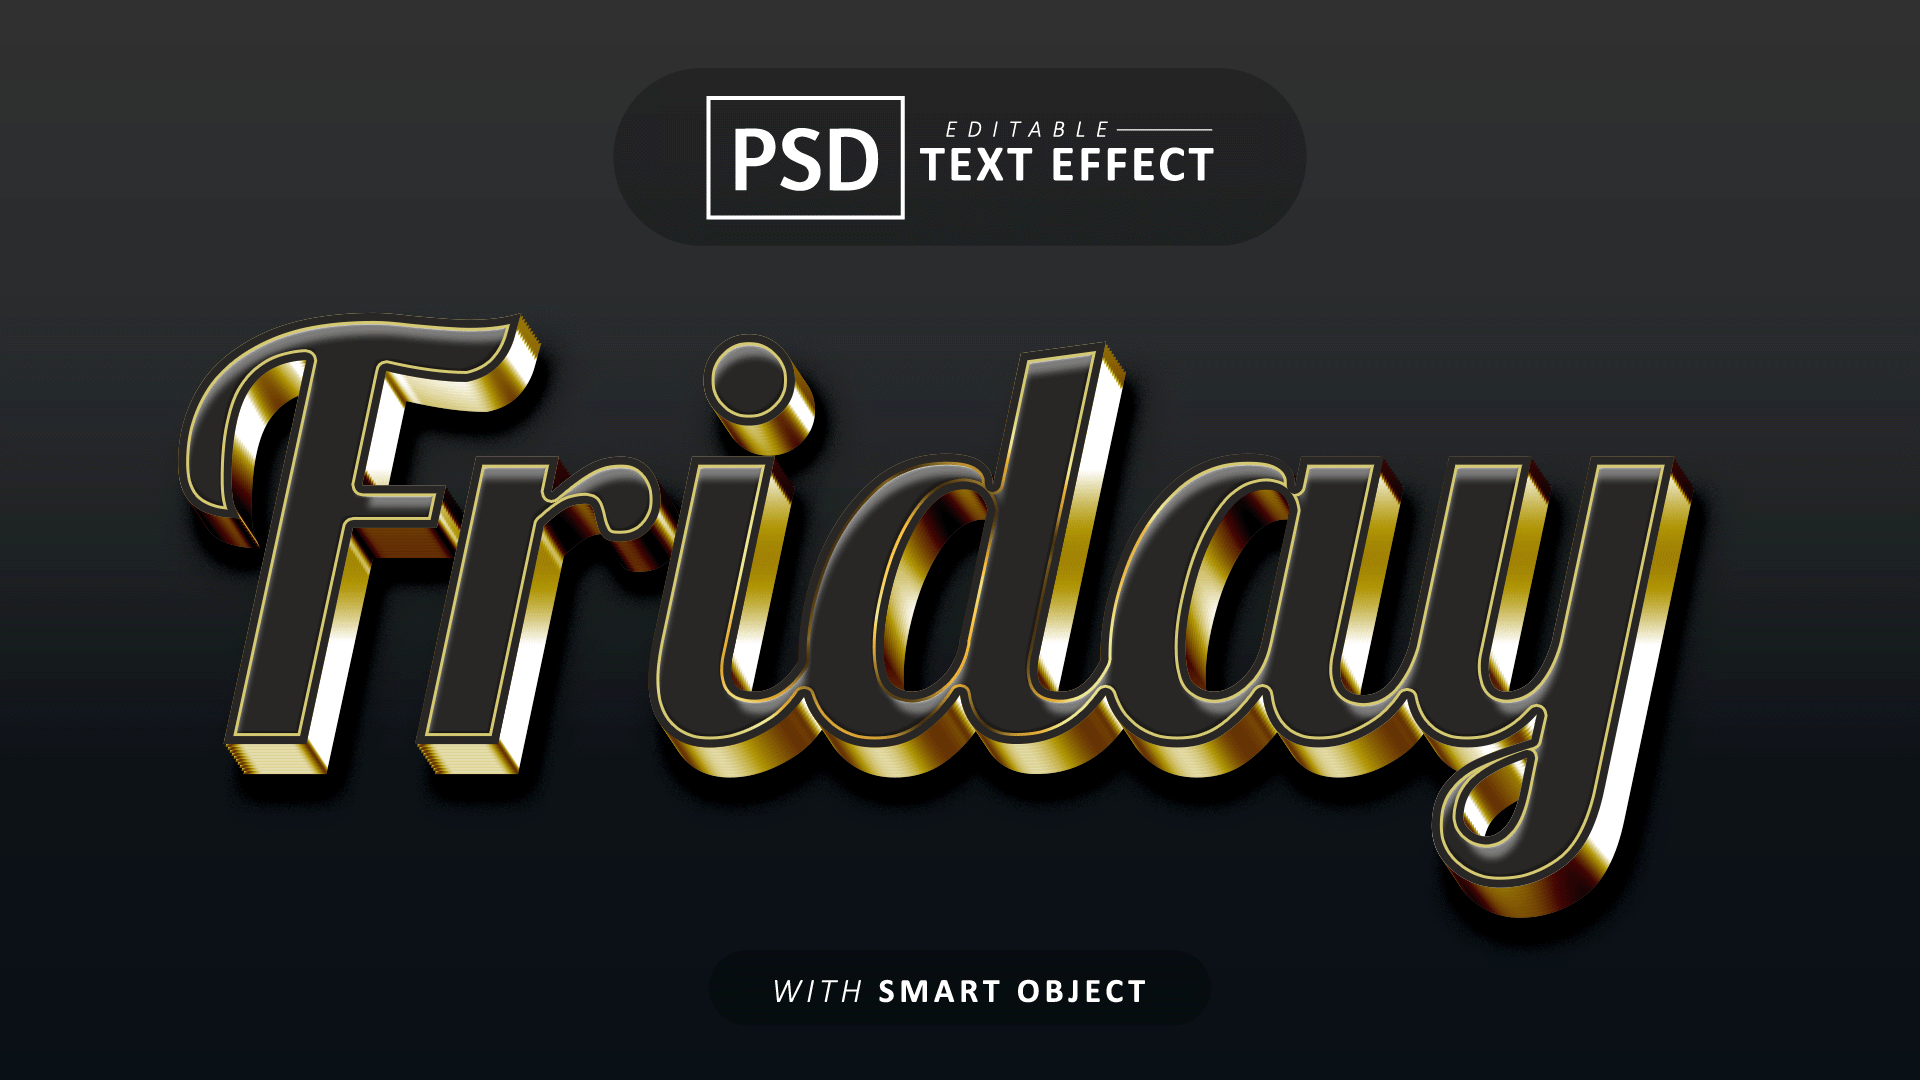 Friday text effect rendition image